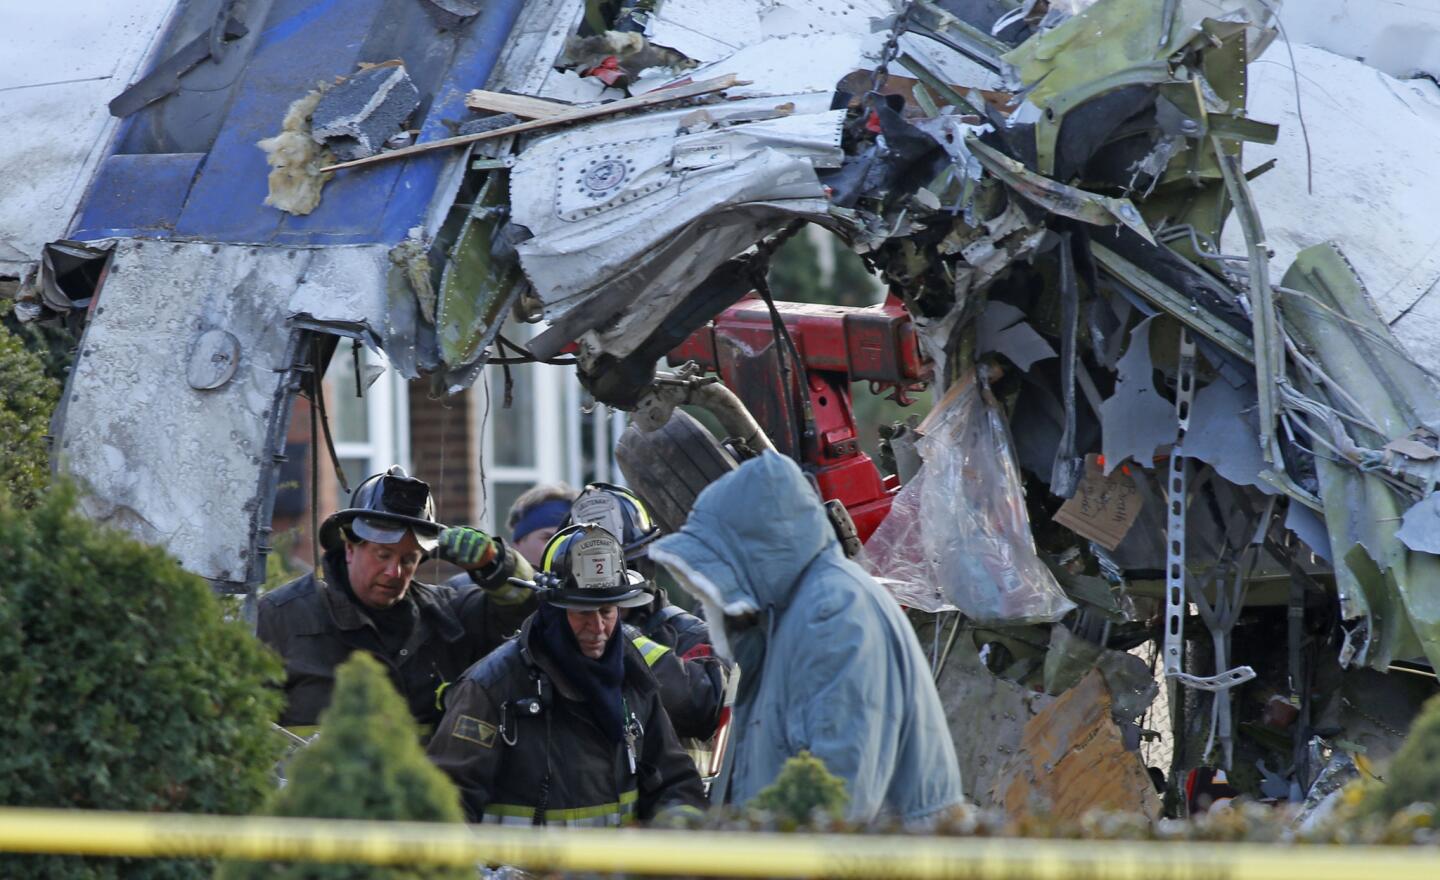 The plane that crashed early Tuesday in the 6500 block of South Knox Avenue near Midway Airport is slowly pulled away from the home it crashed into. The aircraft was lowered, cut apart and removed.